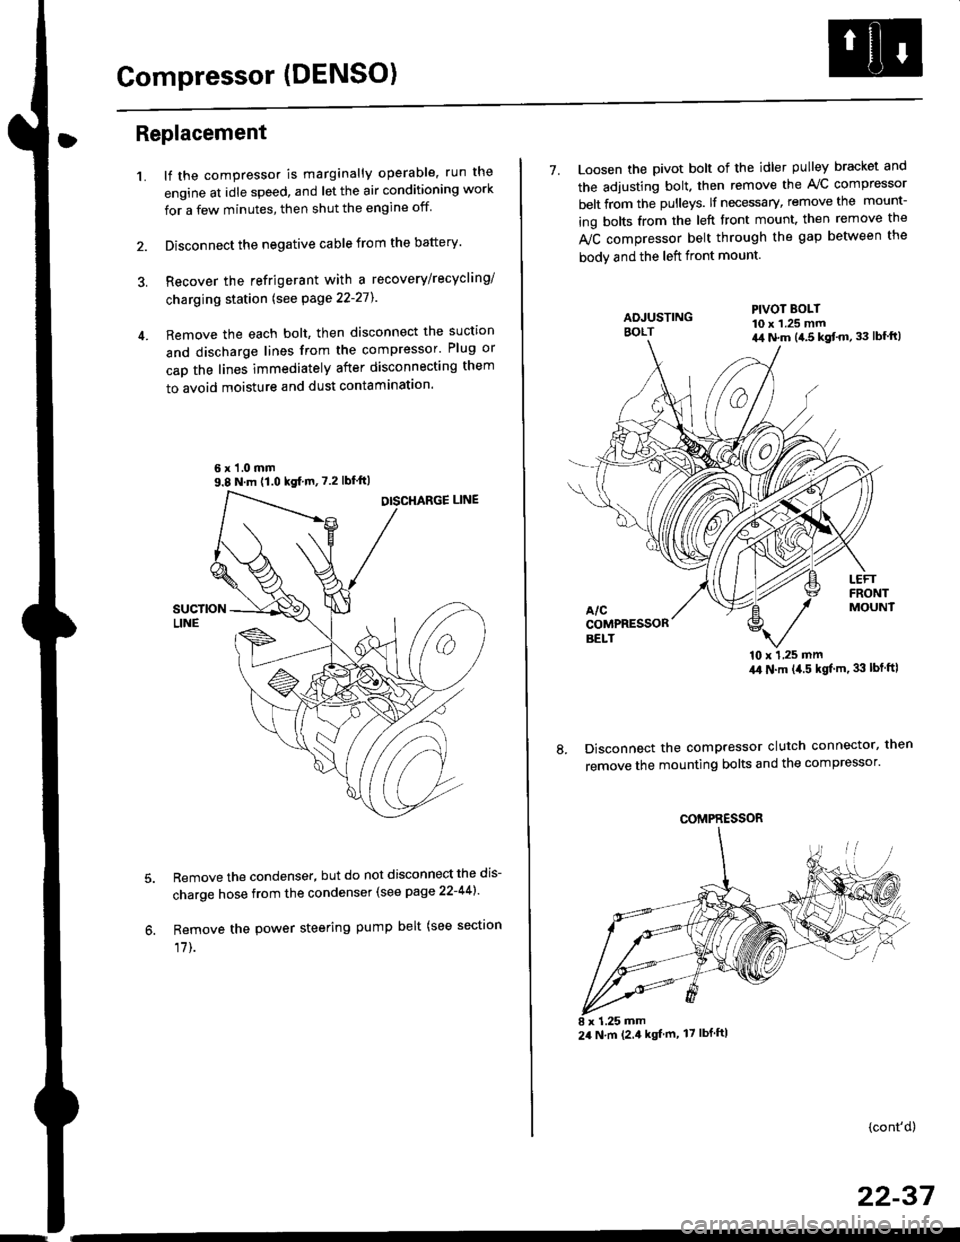 HONDA CIVIC 1996 6.G User Guide Compressor (DENSO)
Replacement
1.lf the compressor is marginally operable, run the
engine at idle speed, and let the air conditioning work
for a few minutes, then shut the engine off
Disconnect the ne